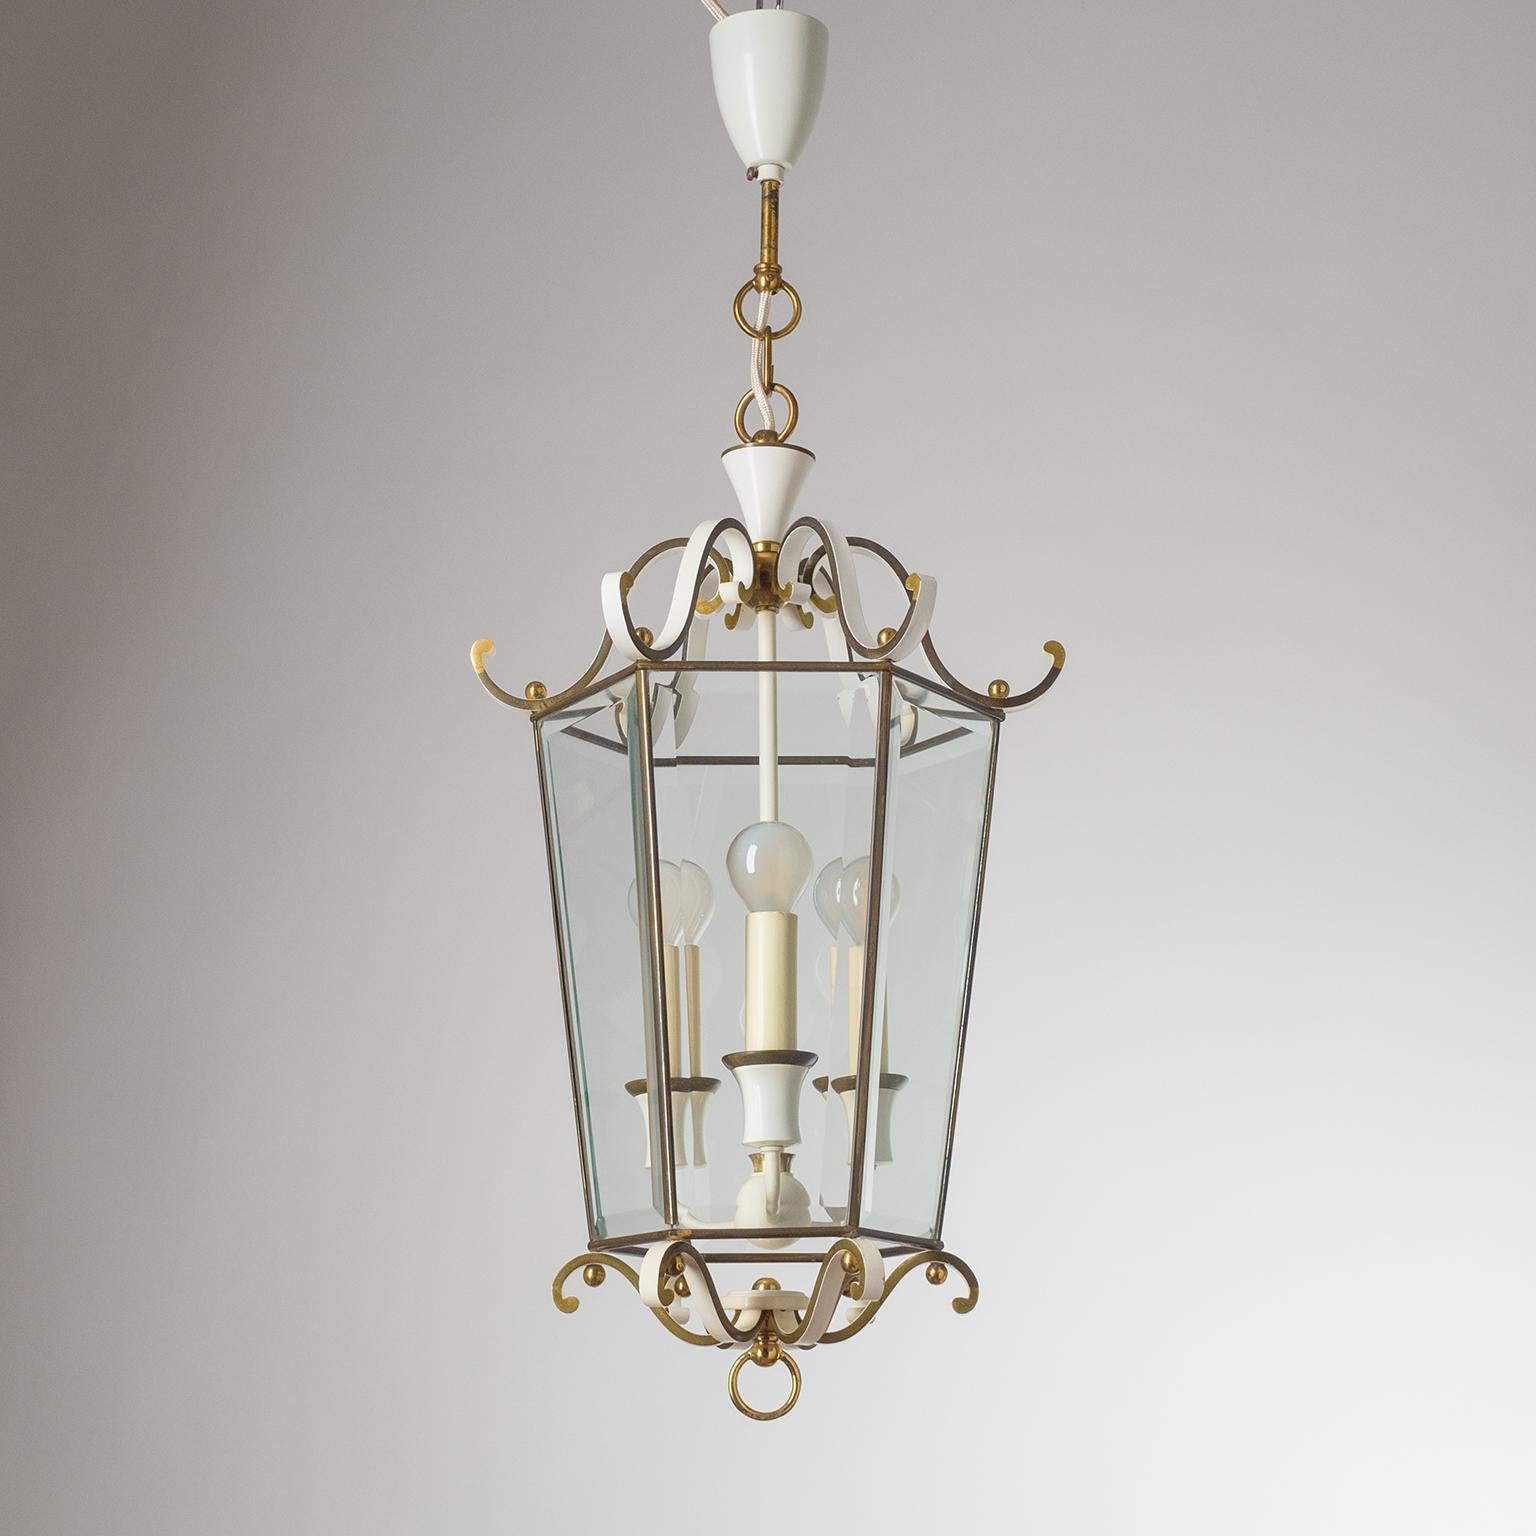 Lyrical mid-century brass lantern with faceted glass. Very intricate design with a solid hexagonal brass structure, which is partially enameled in white, and six faceted glass elements. Three original E14 sockets with new wiring.